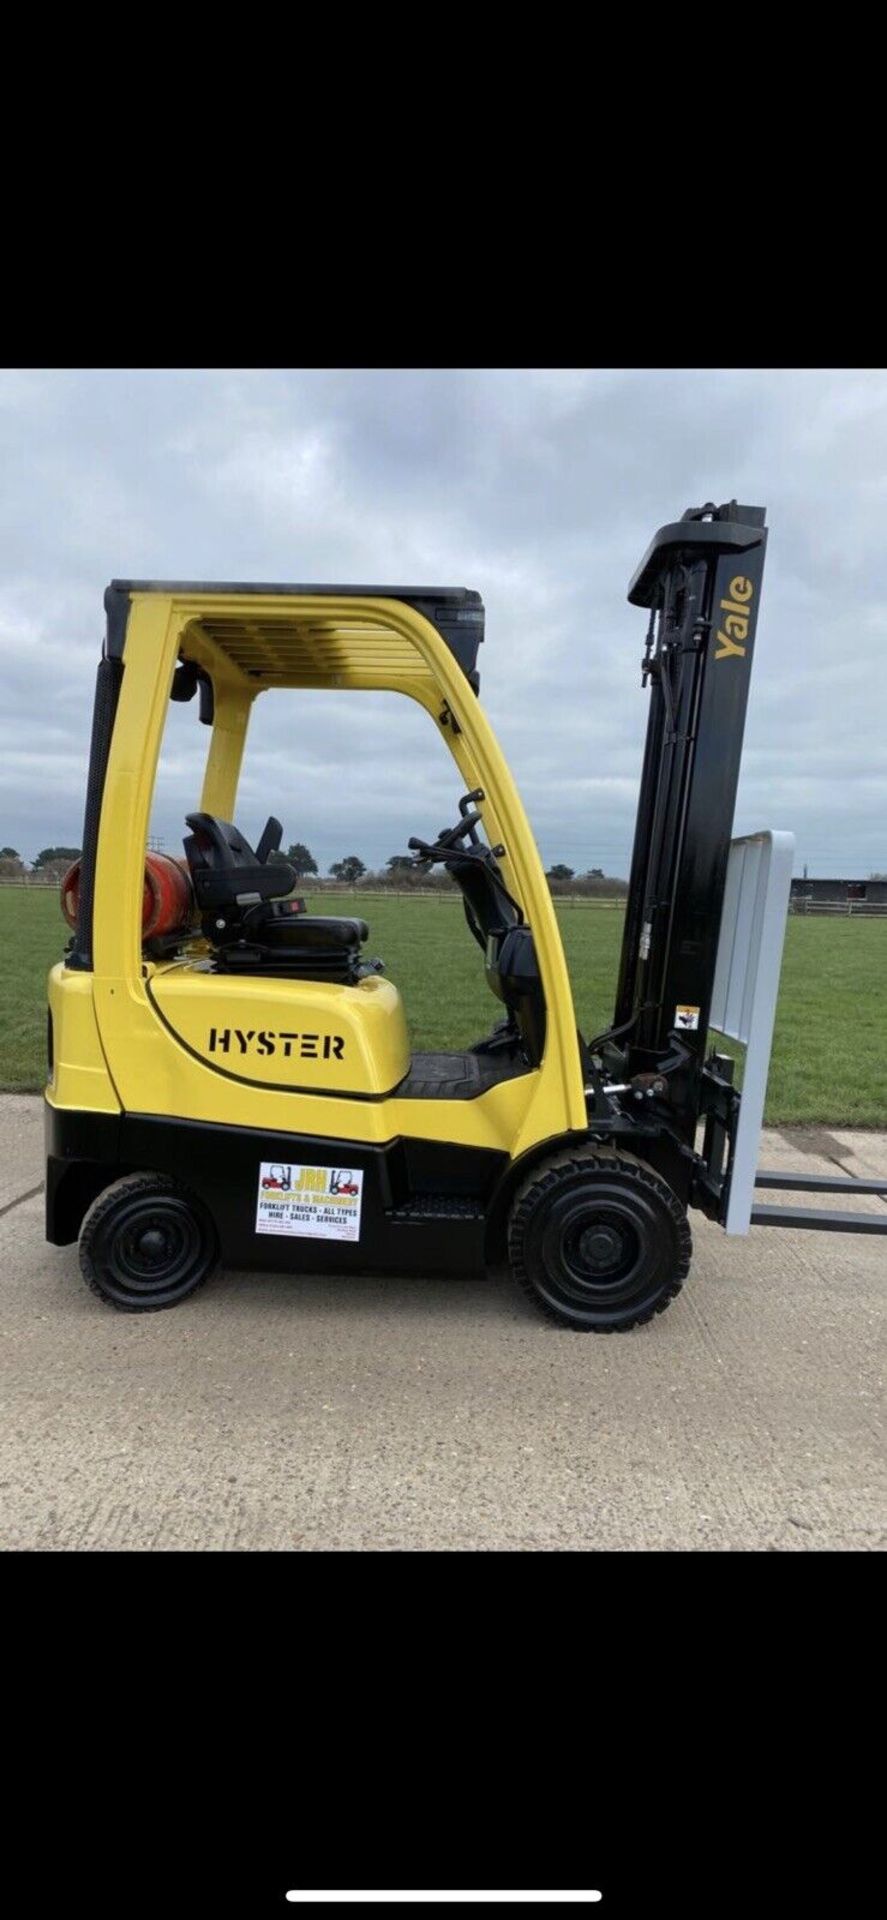 Hyster 1.8 Tonne Gas Forklift 2016 - Image 2 of 5